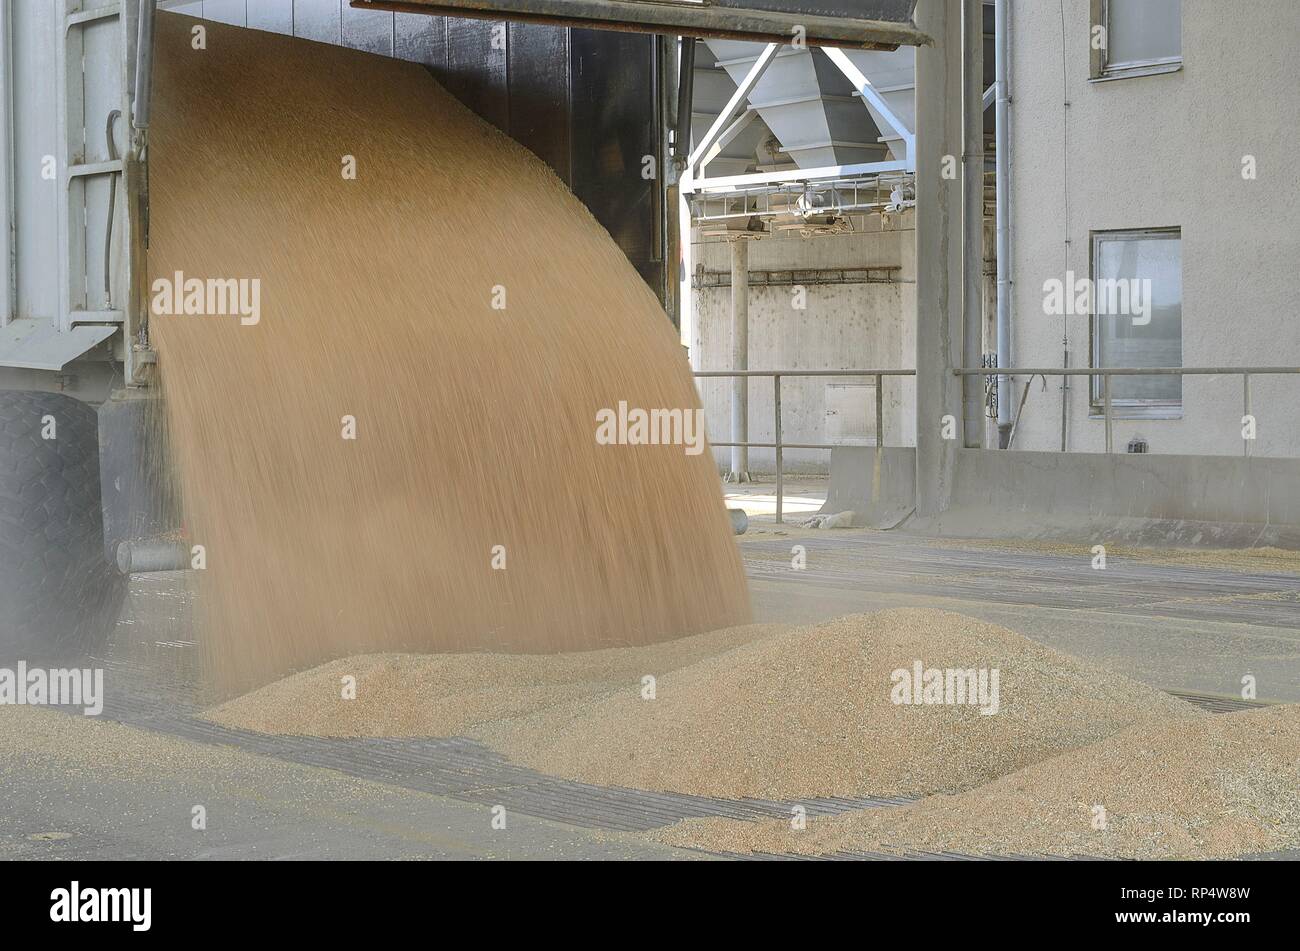 Just harvested corn inside a trailer. Grain poured from trailer into a silo for processing Stock Photo